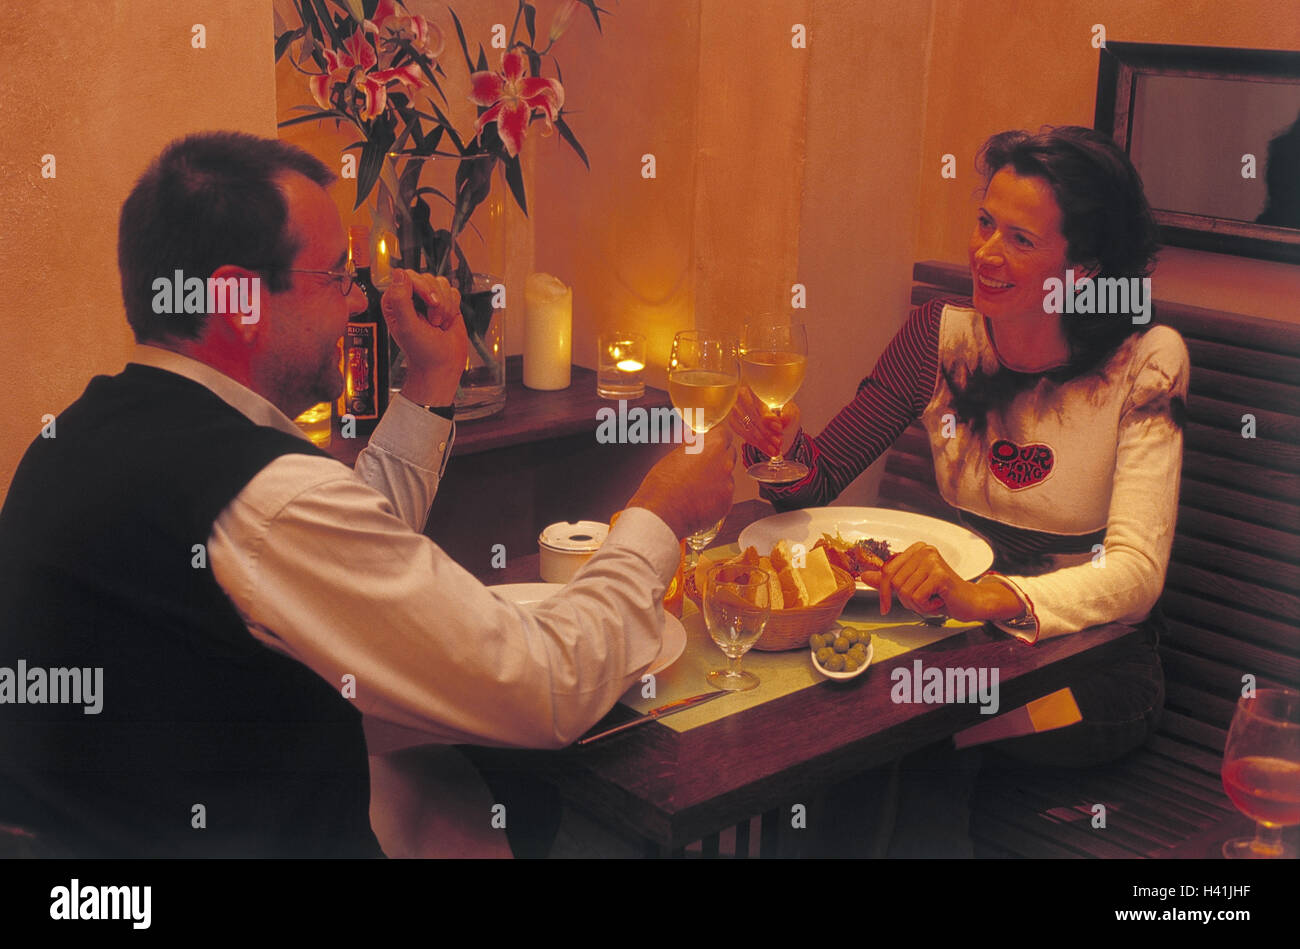 Restaurant, couple, dinner, solemnly, romantically, no model release bar, table, partnership, respect, falls in love, eye contact, wineglasses, wine drink, white wine, kick off, Cheers, celebrate, 'Candlelight dinner', happy, flirt, satisfaction, love, fl Stock Photo